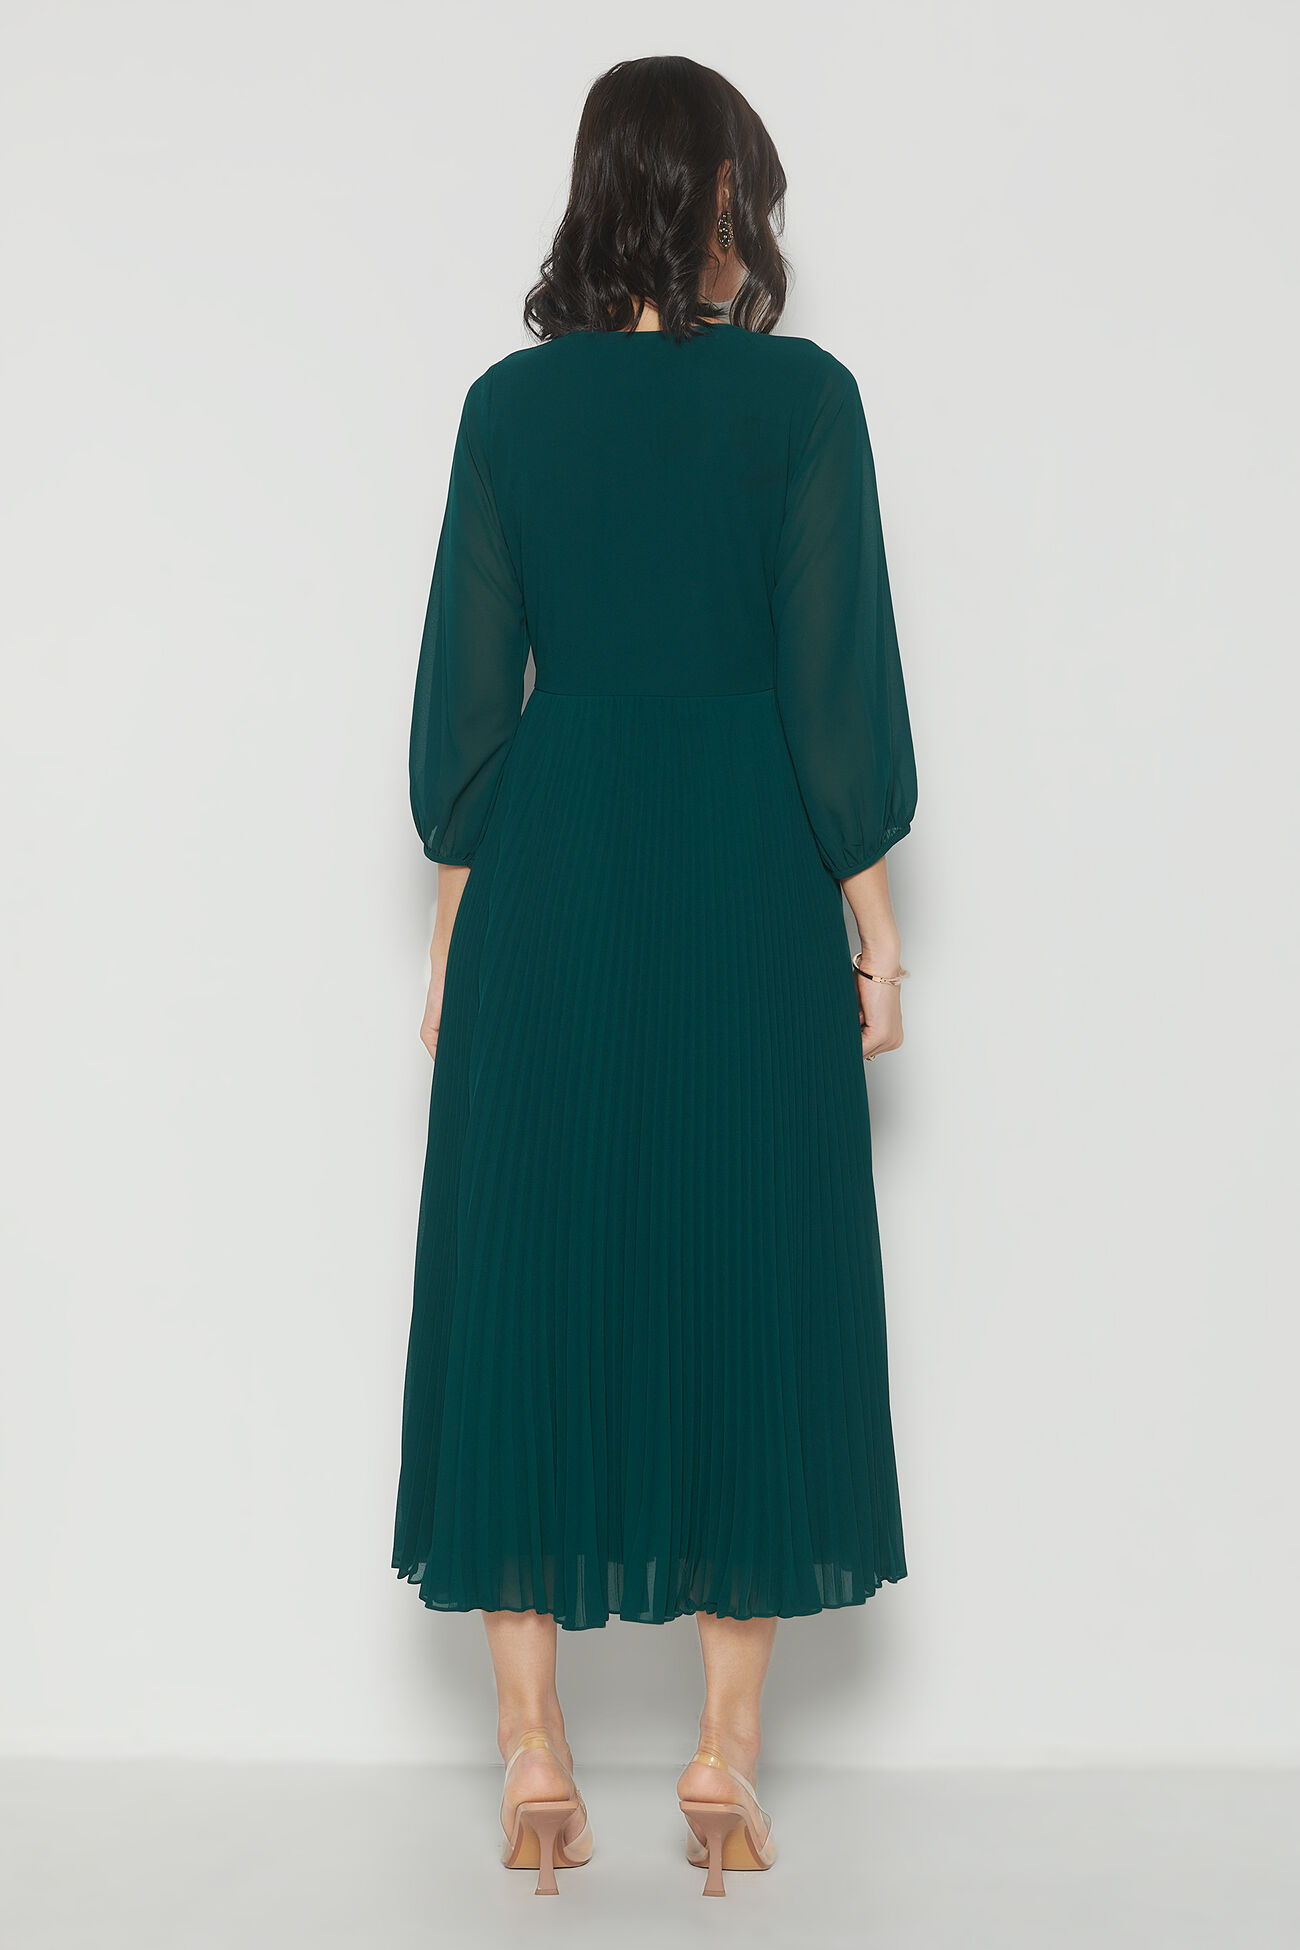 Aubergine Solid Flared Dress, Green, image 5